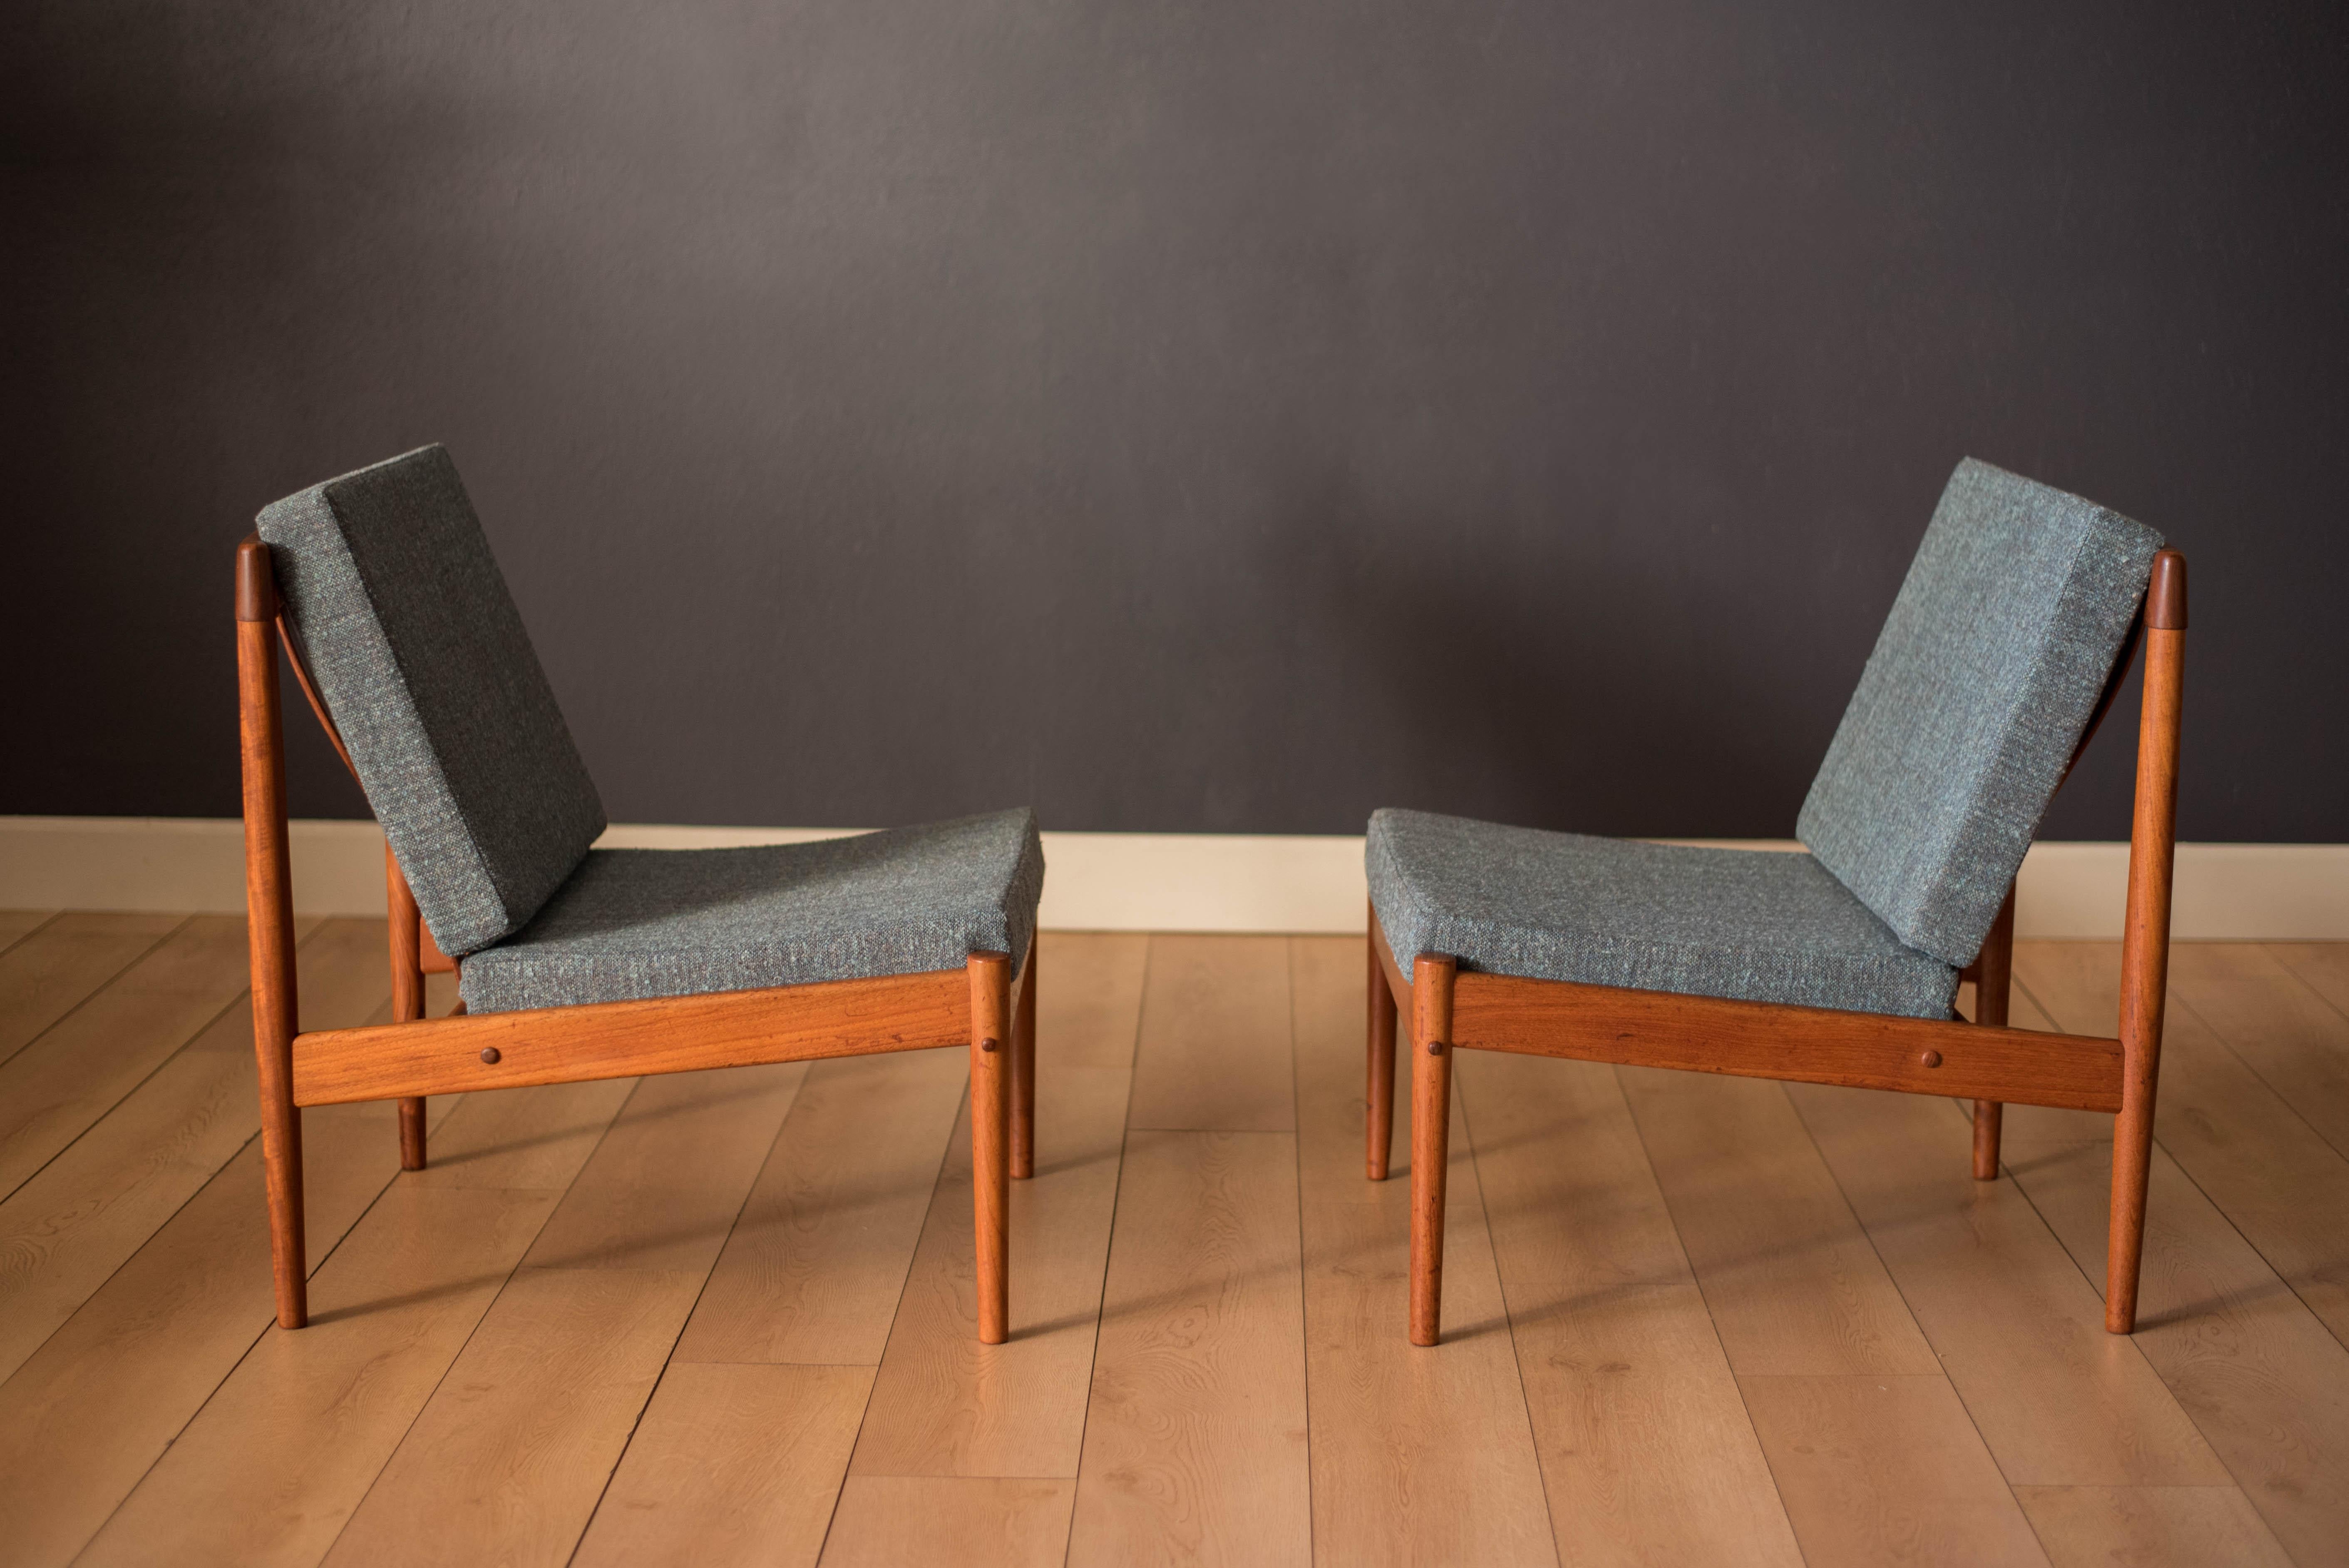 Mid Century slipper lounge chairs designed by Grete Jalk for Poul Jeppesen Mobelfabrik, made in Denmark. Features an armless modern design with a sculpted teak frame. This set has been reupholstered in a soft blue tweed blend and brand new straps.